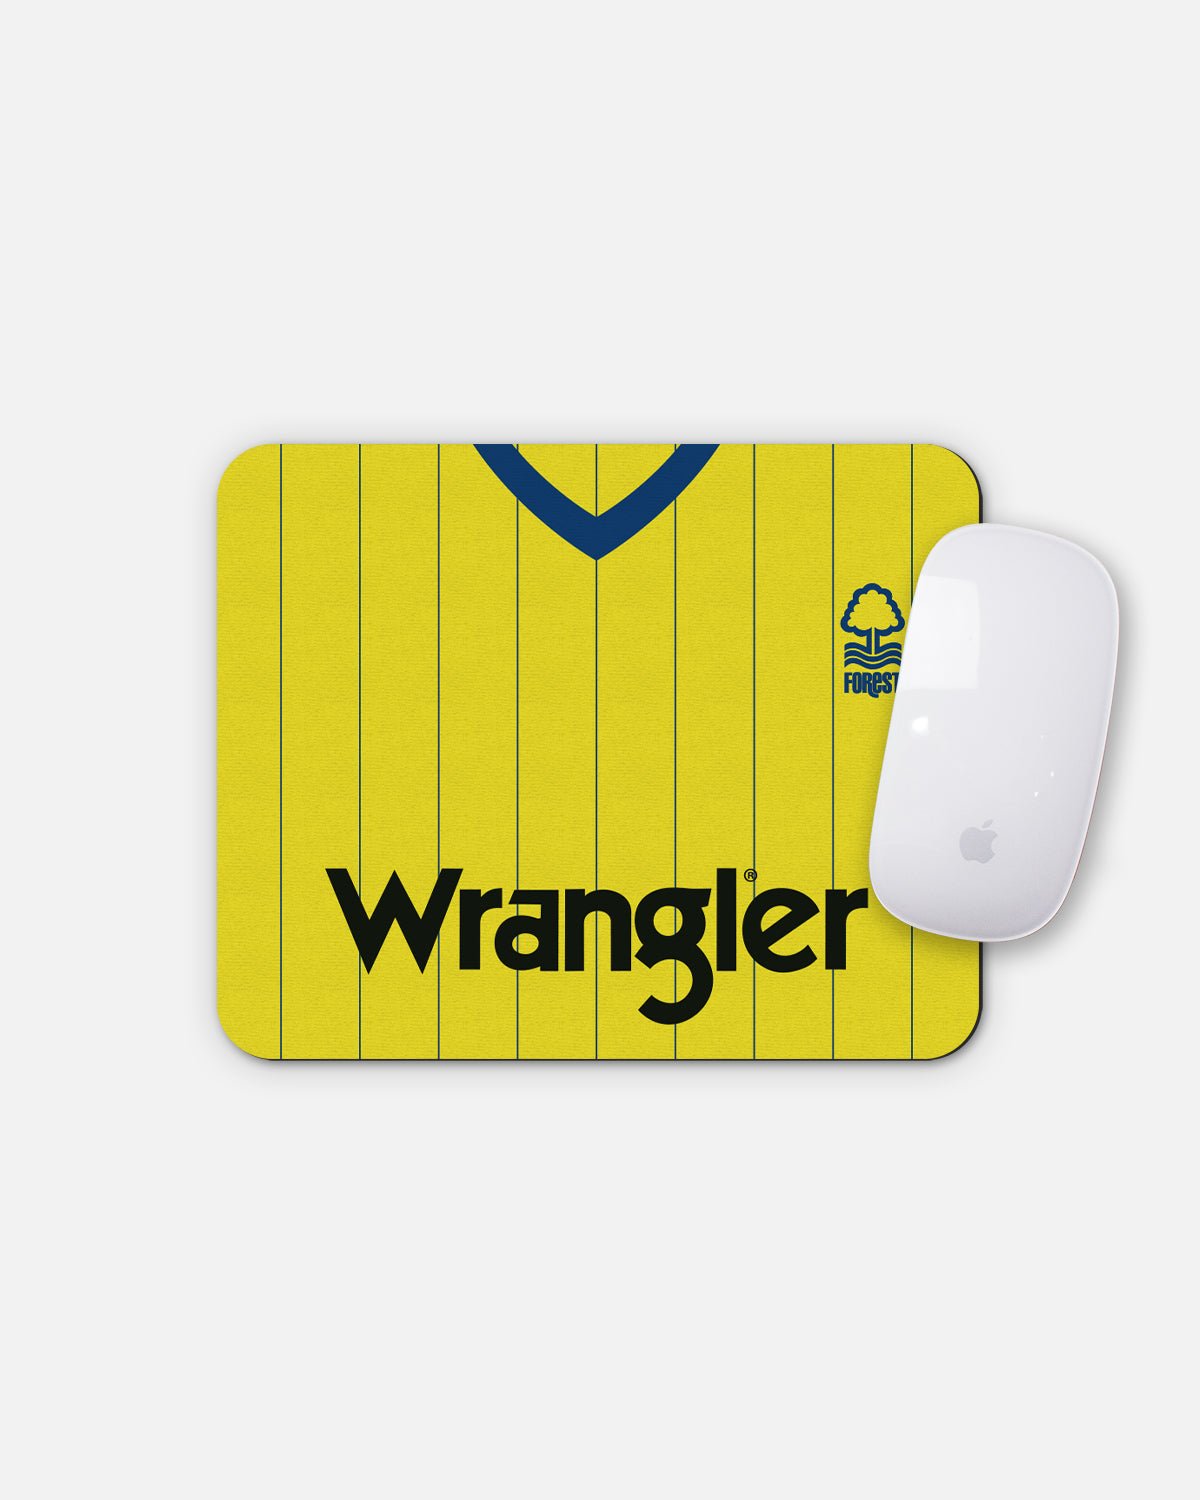 NFFC 1982 Away Mouse Mat - Nottingham Forest FC